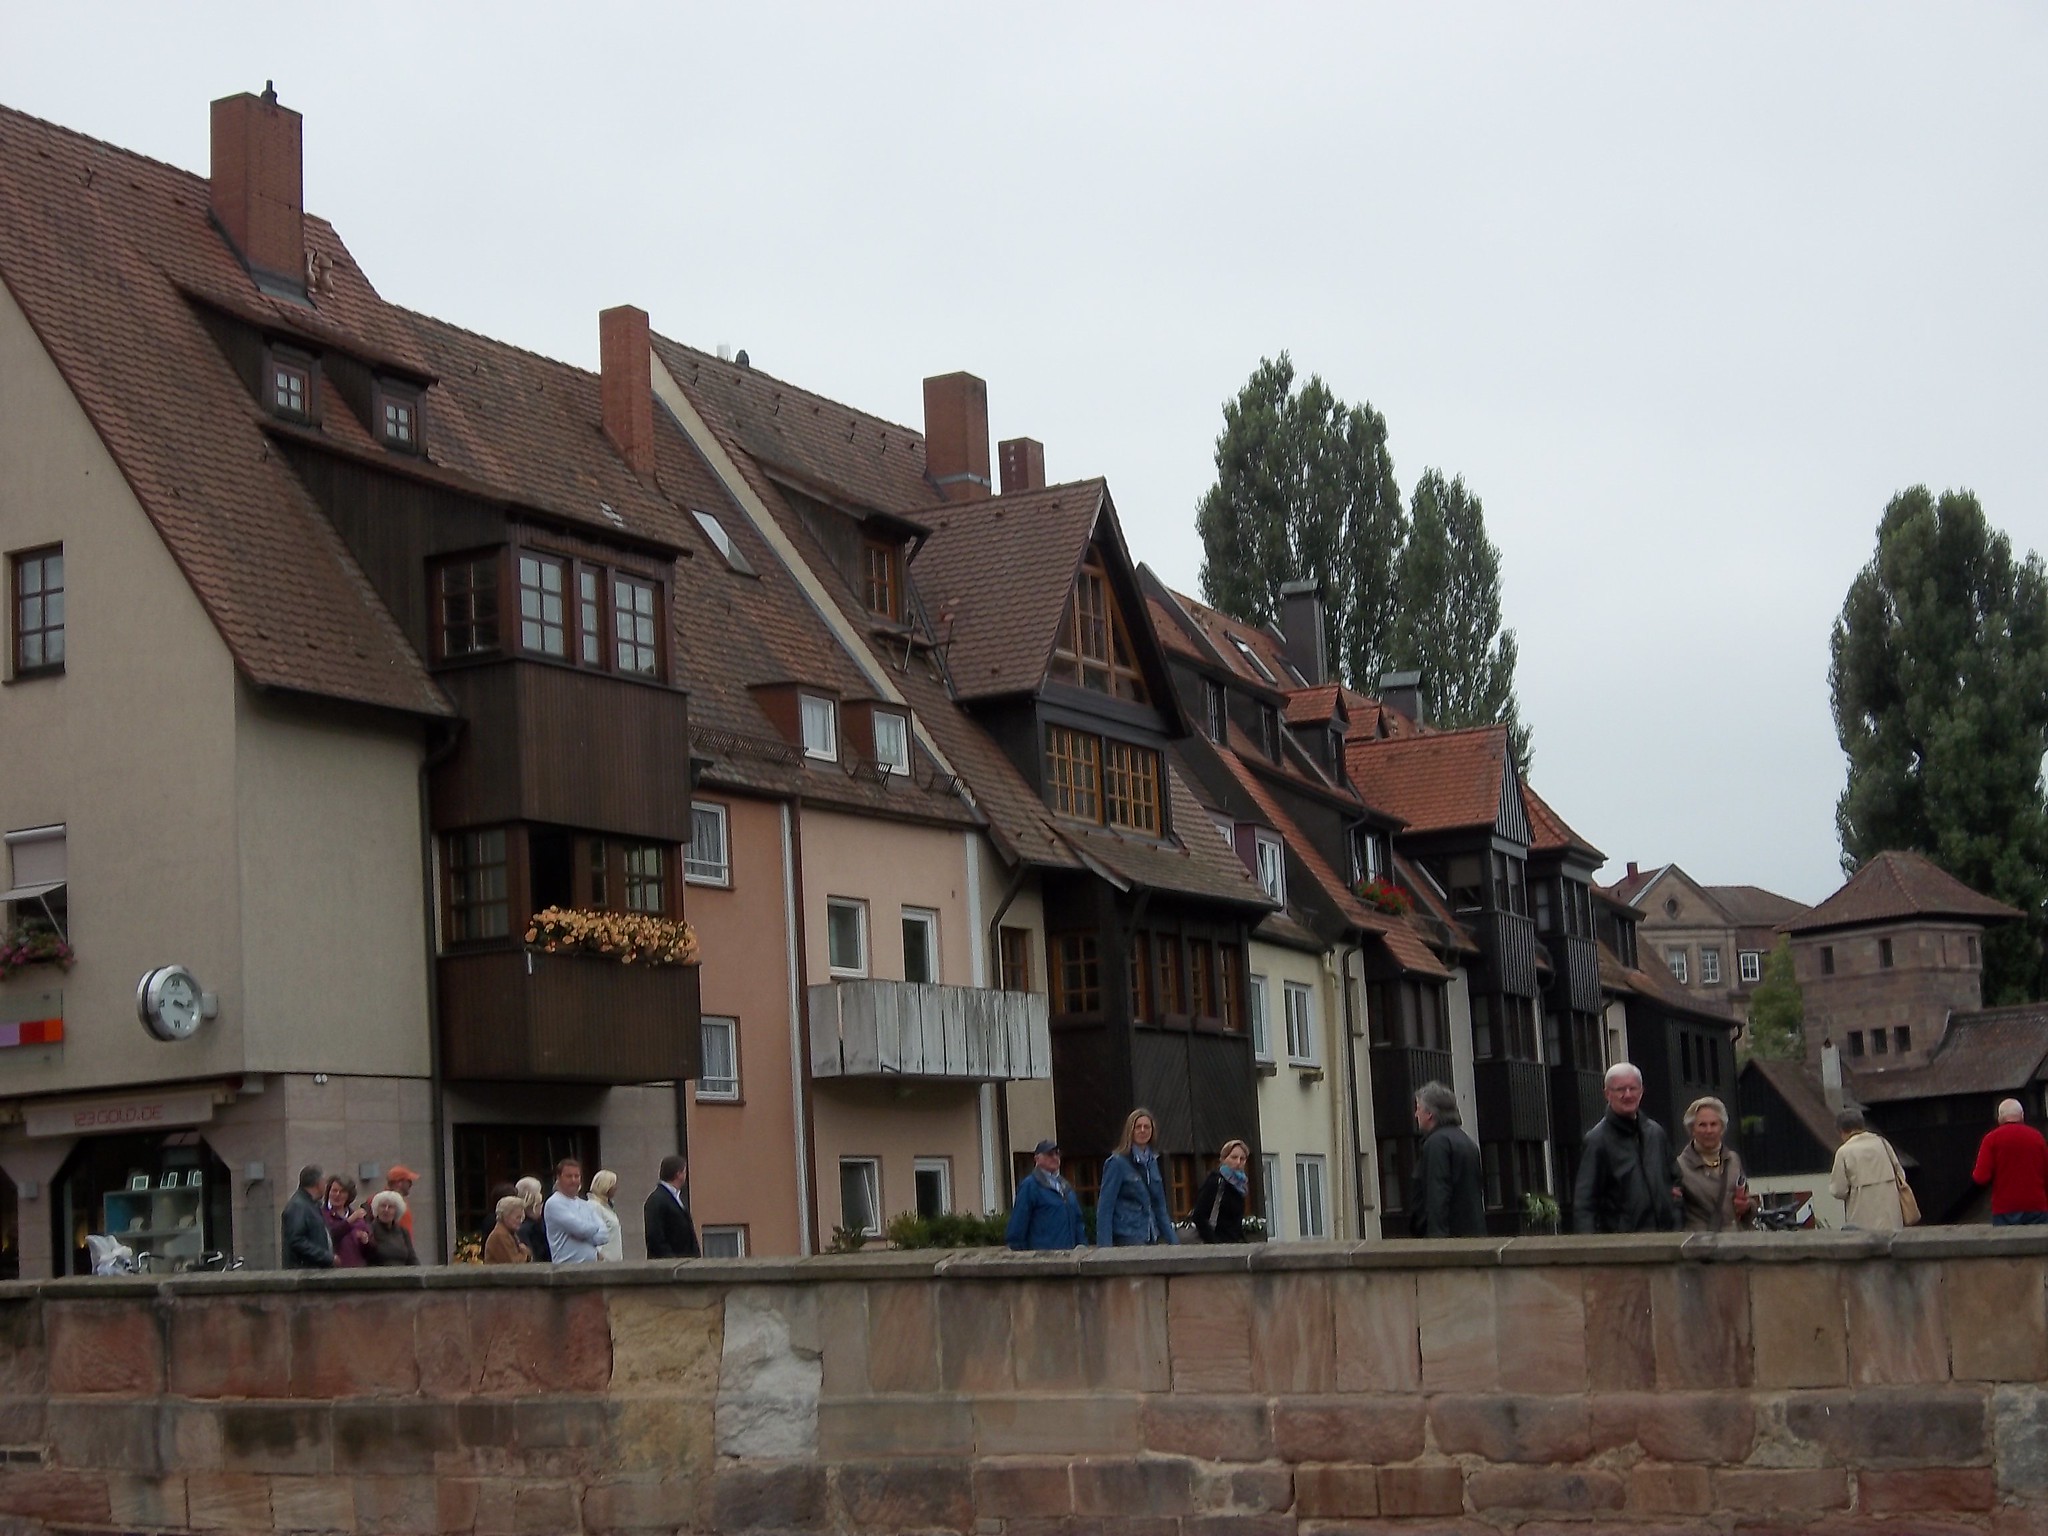 To Nuremberg: A Letter to the City I fell In Love And Will Forever Be